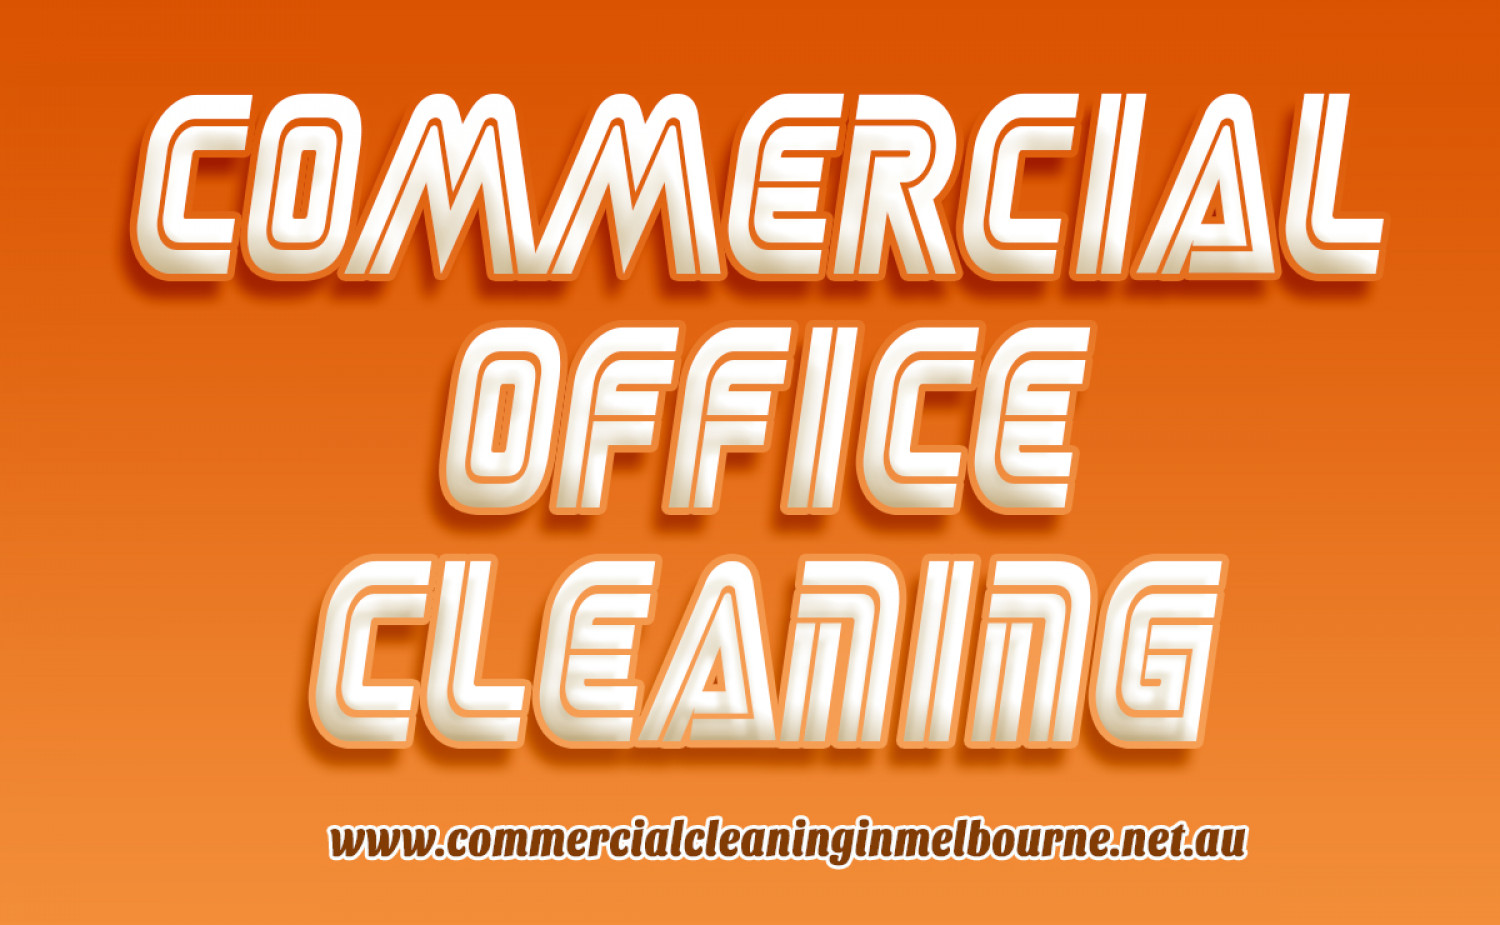 Neat and Clean office with Commercial Cleaning Services Melbourne Infographic